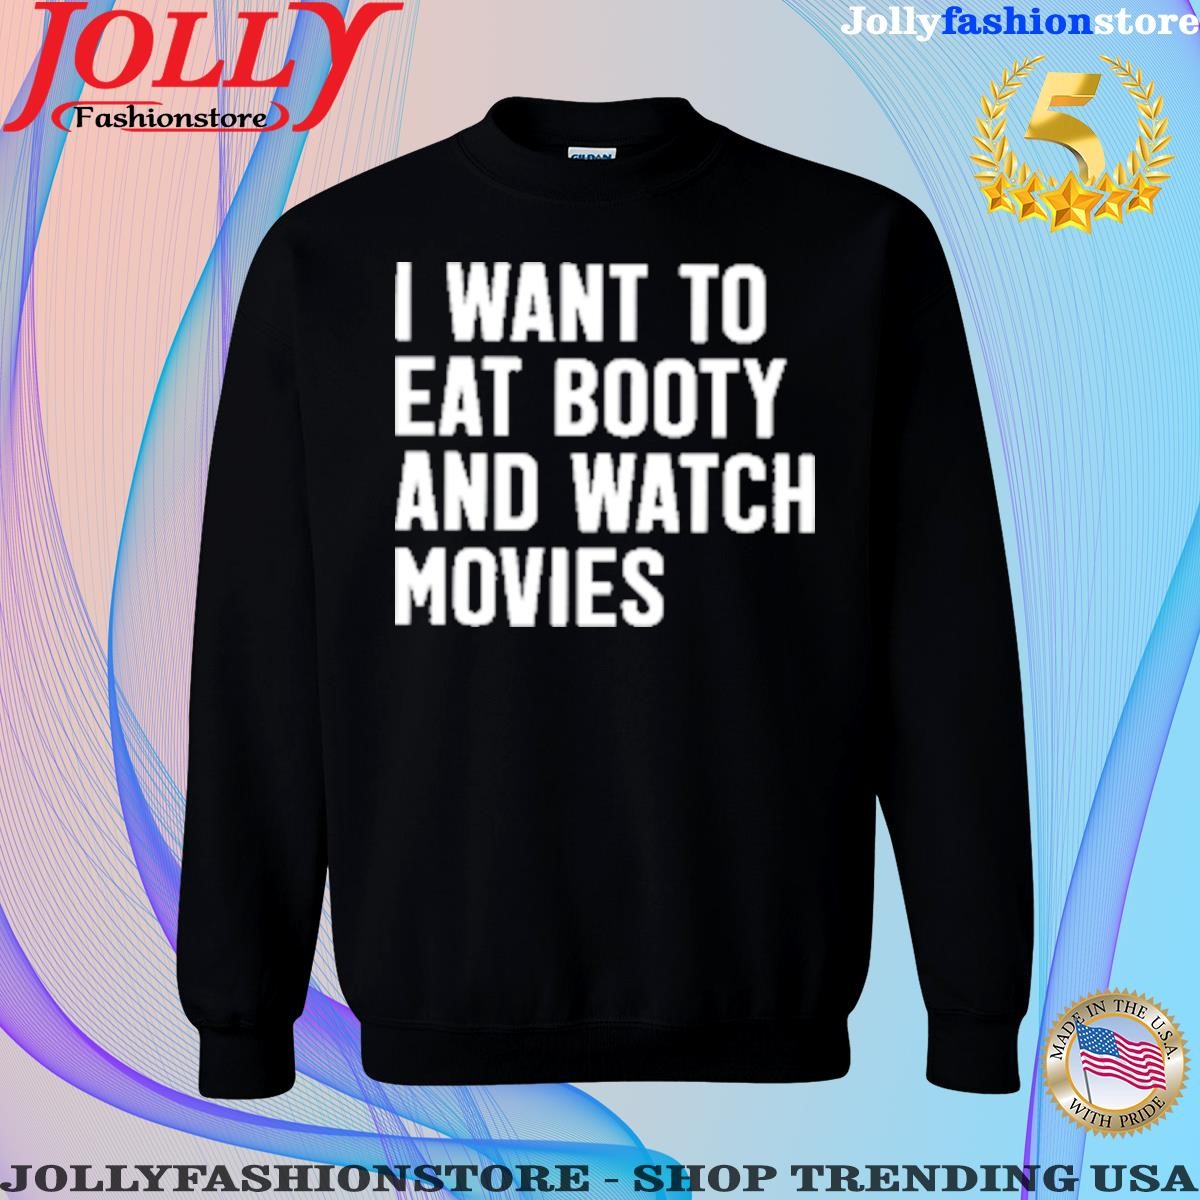 I want to eat booty and watch movies Sweatshirt.png